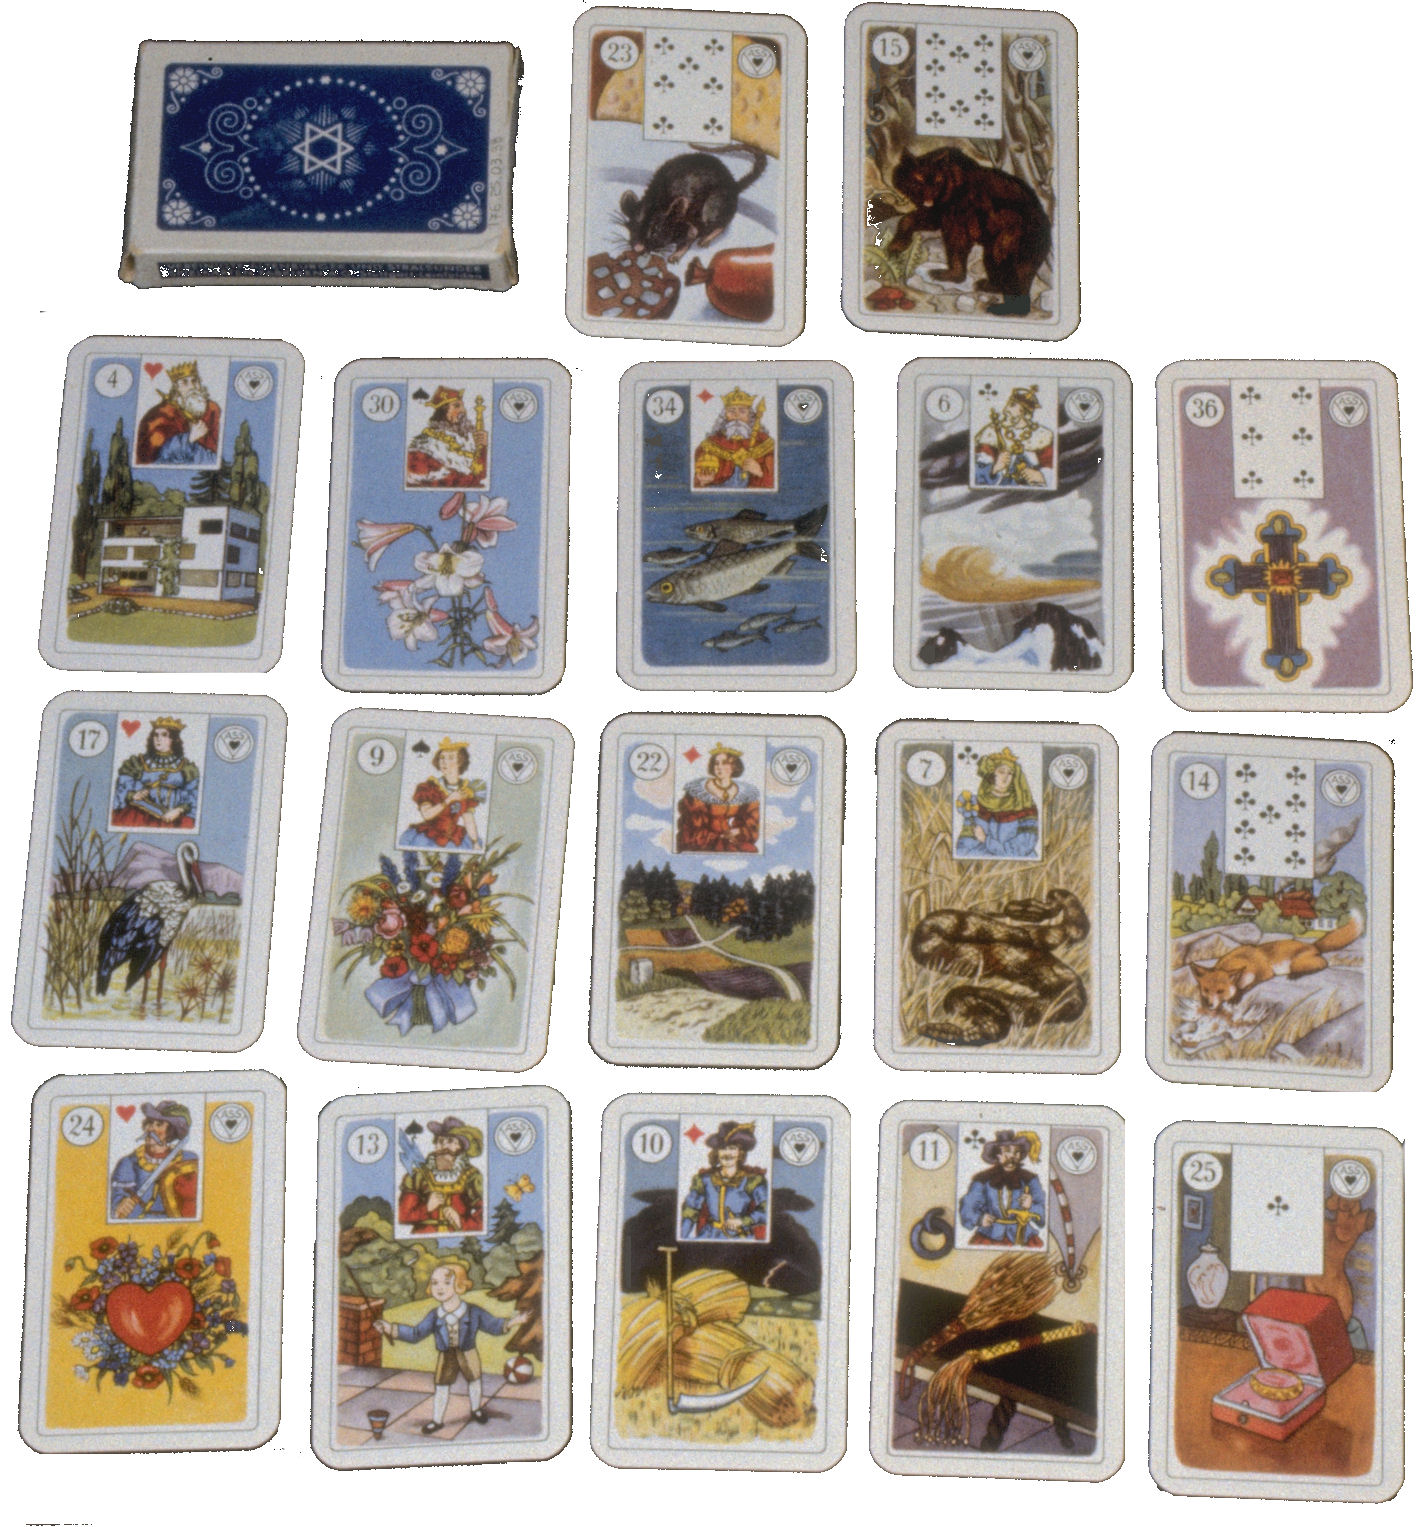 What Is A Deck Of Fortune Telling Cards Called / Tarot Cards Controlled.